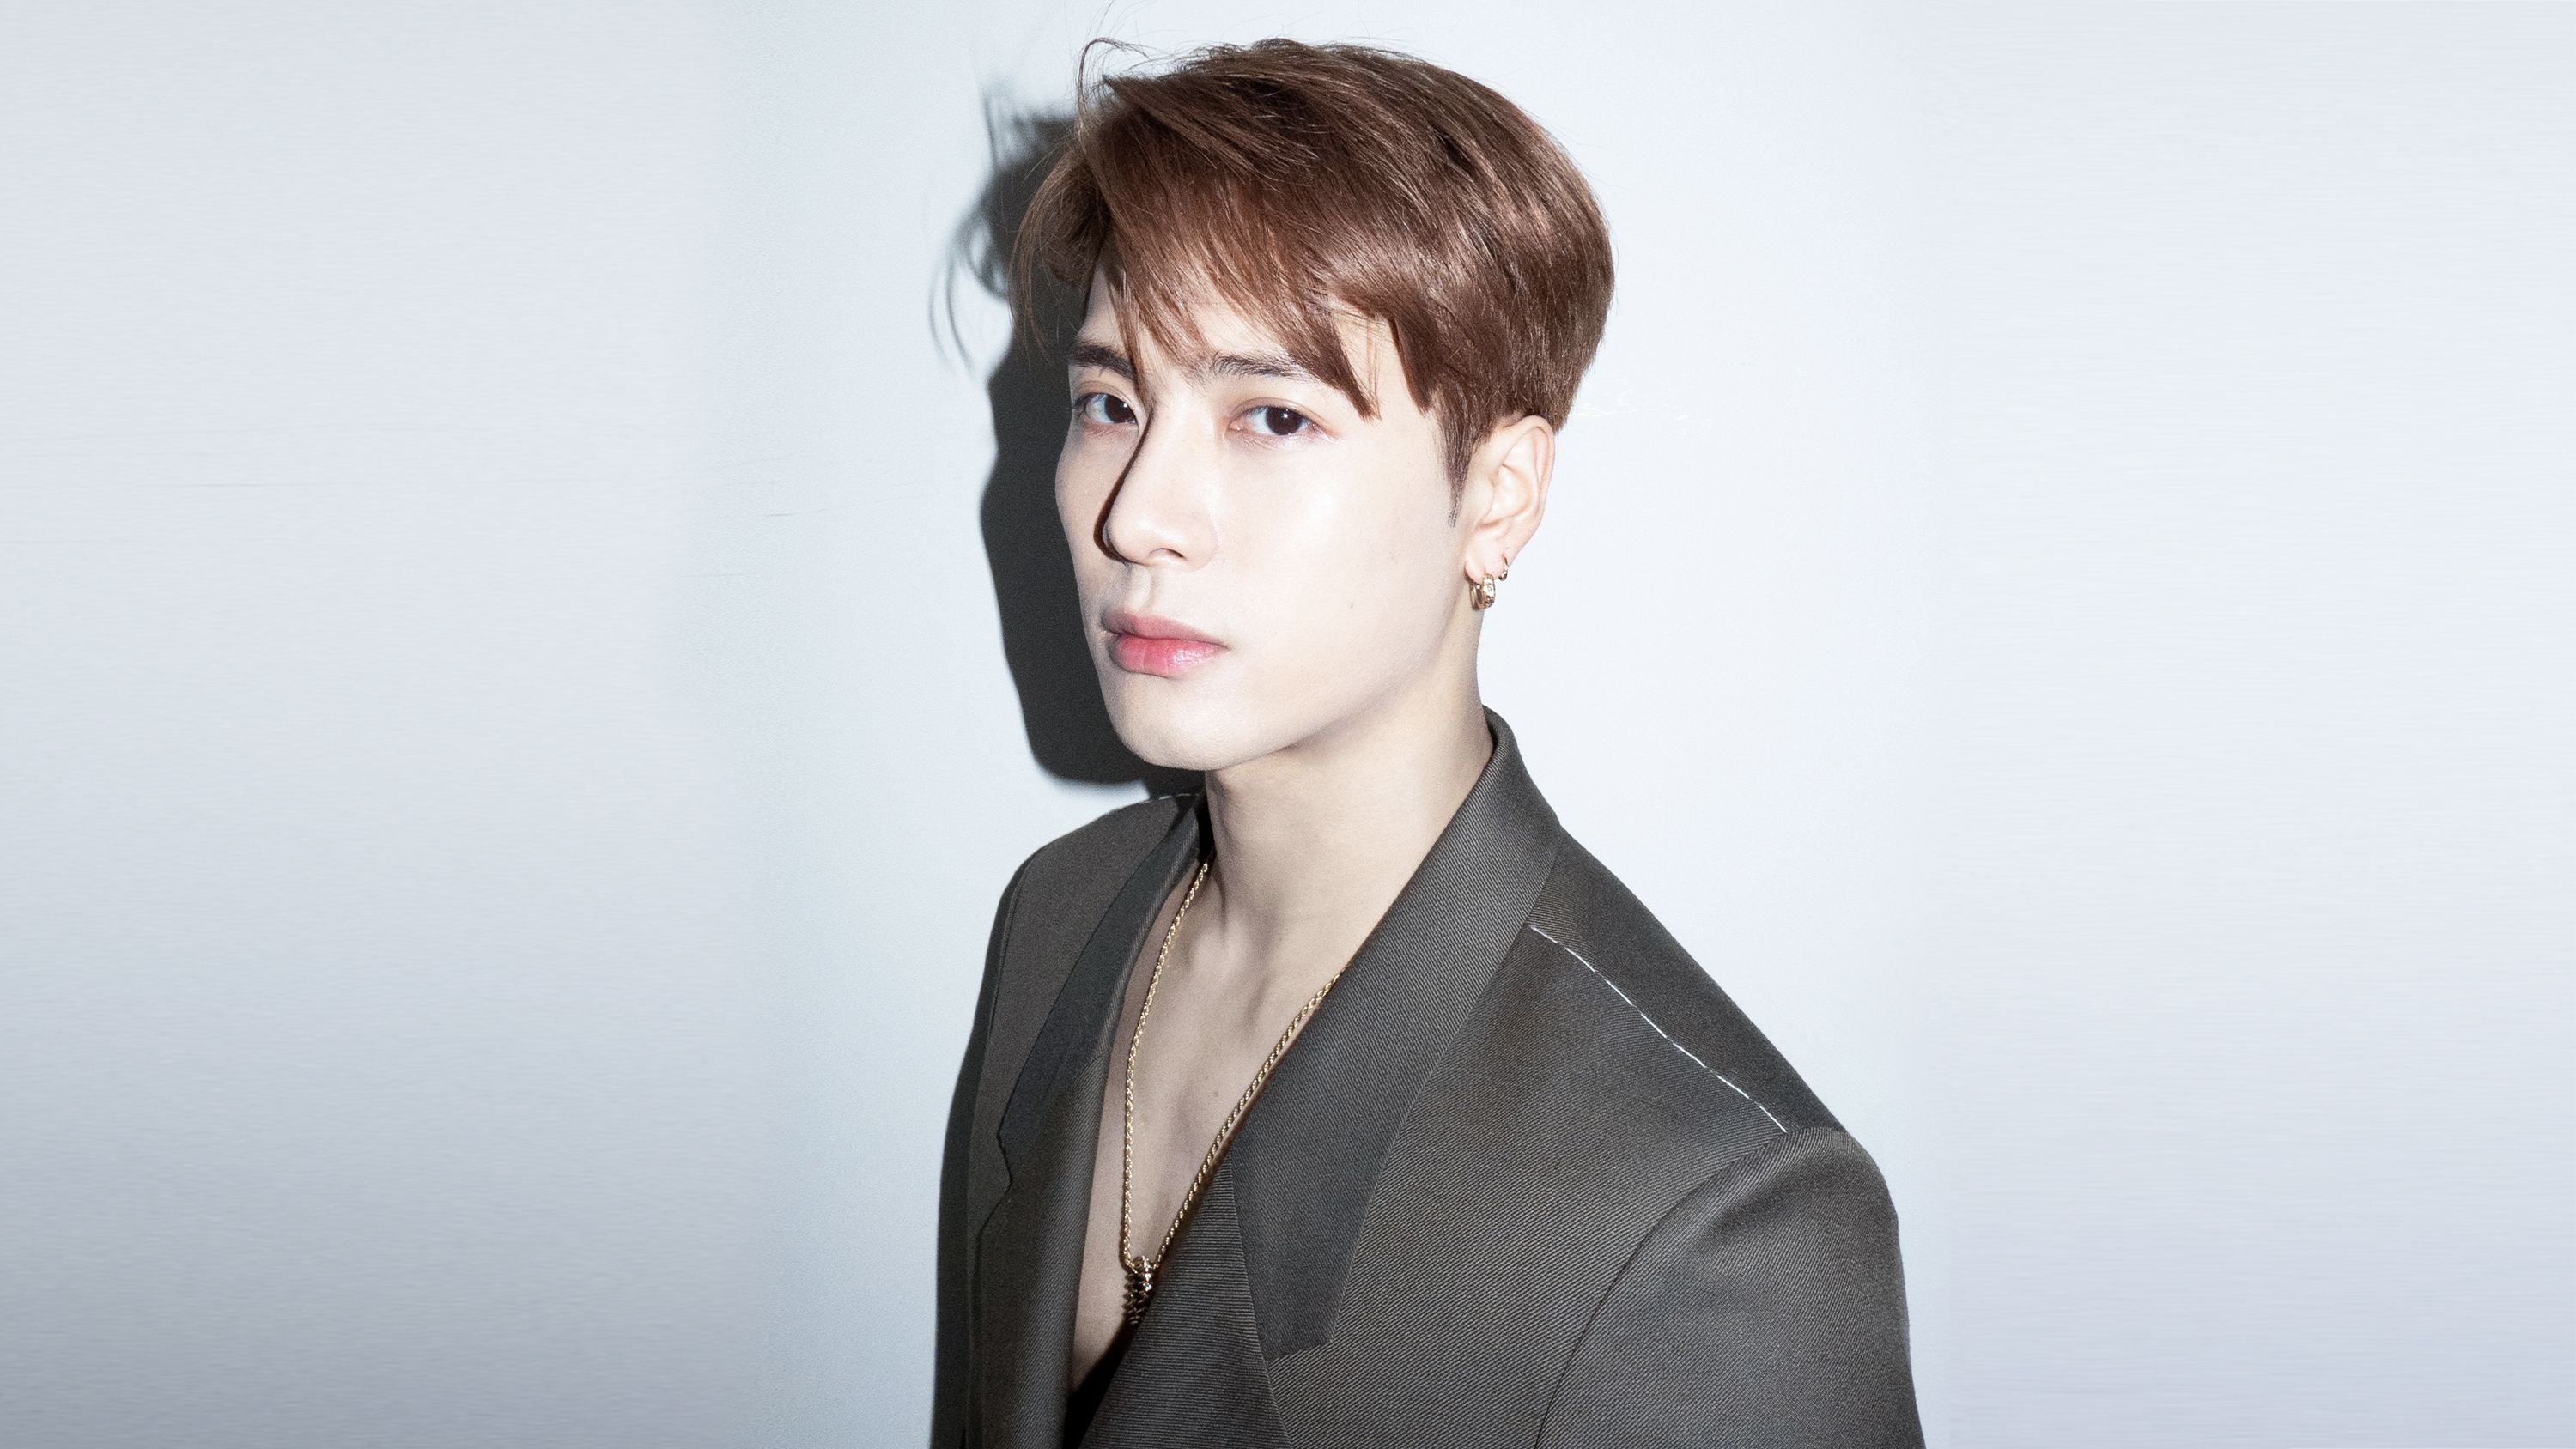 Jackson Wang, Mindreading, Esquire interview, Chinese culture representation, 3000x1690 HD Desktop